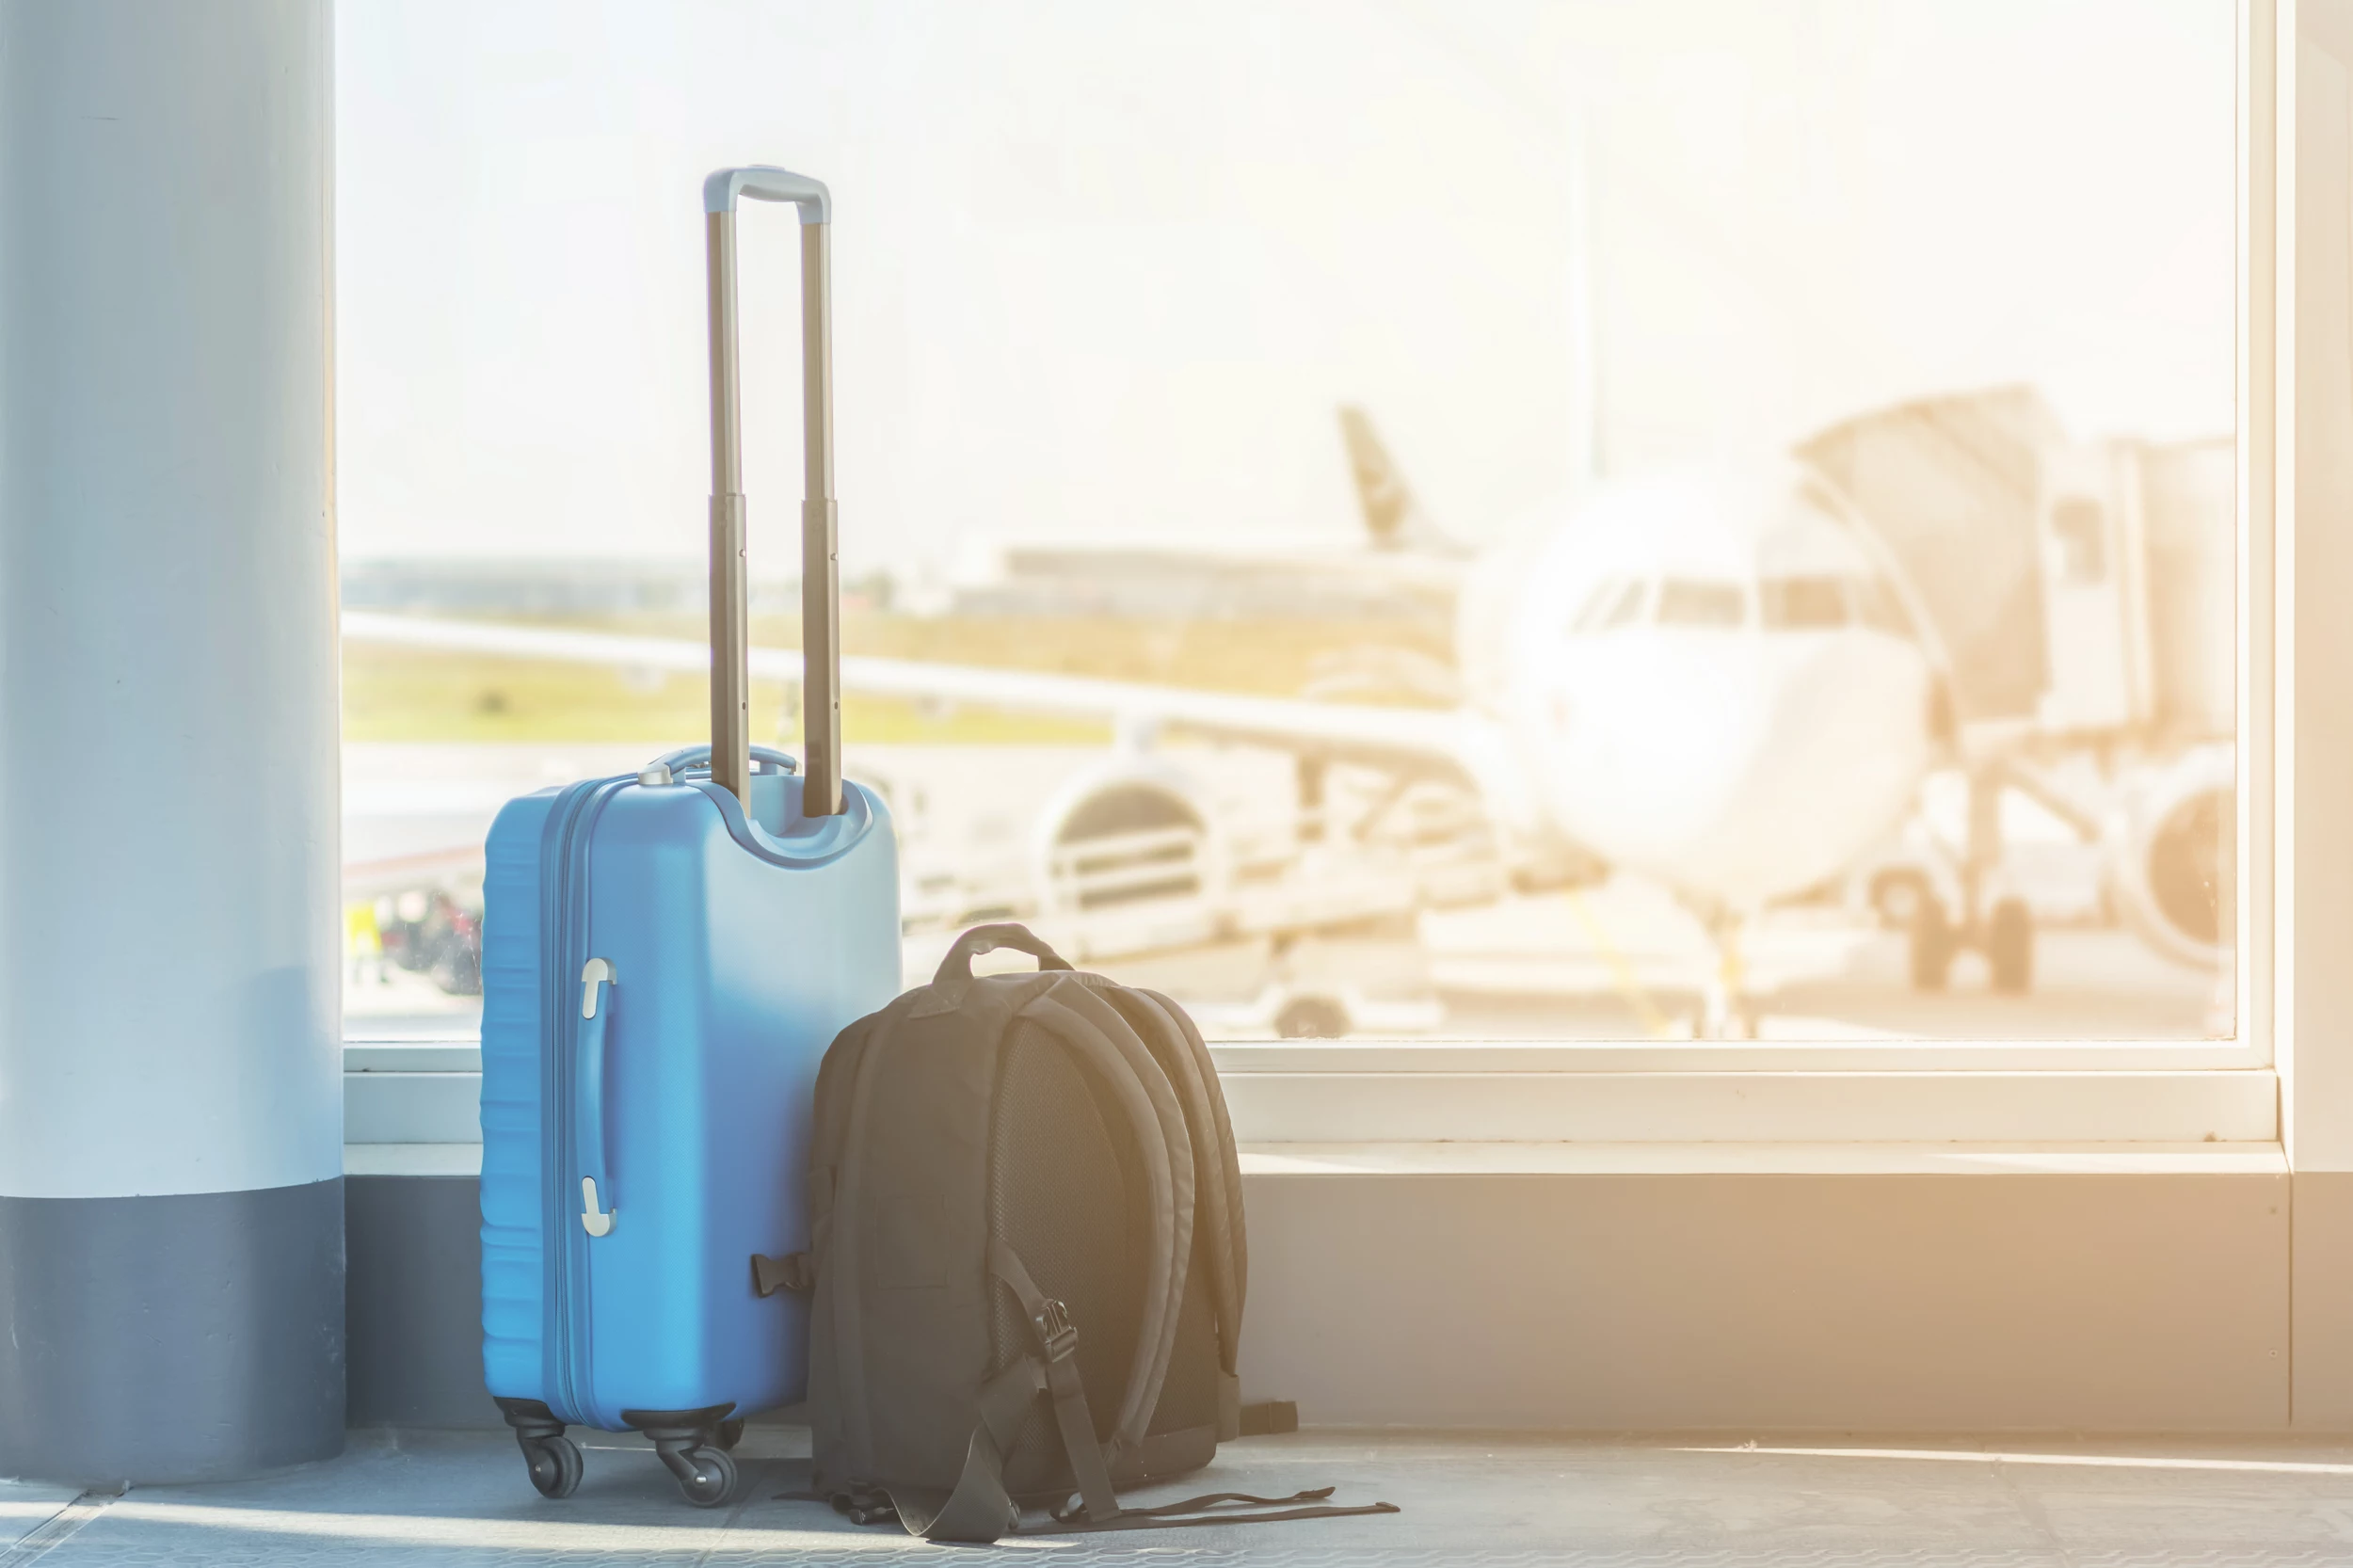 You Can Now Buy People's Unclaimed Luggage Online